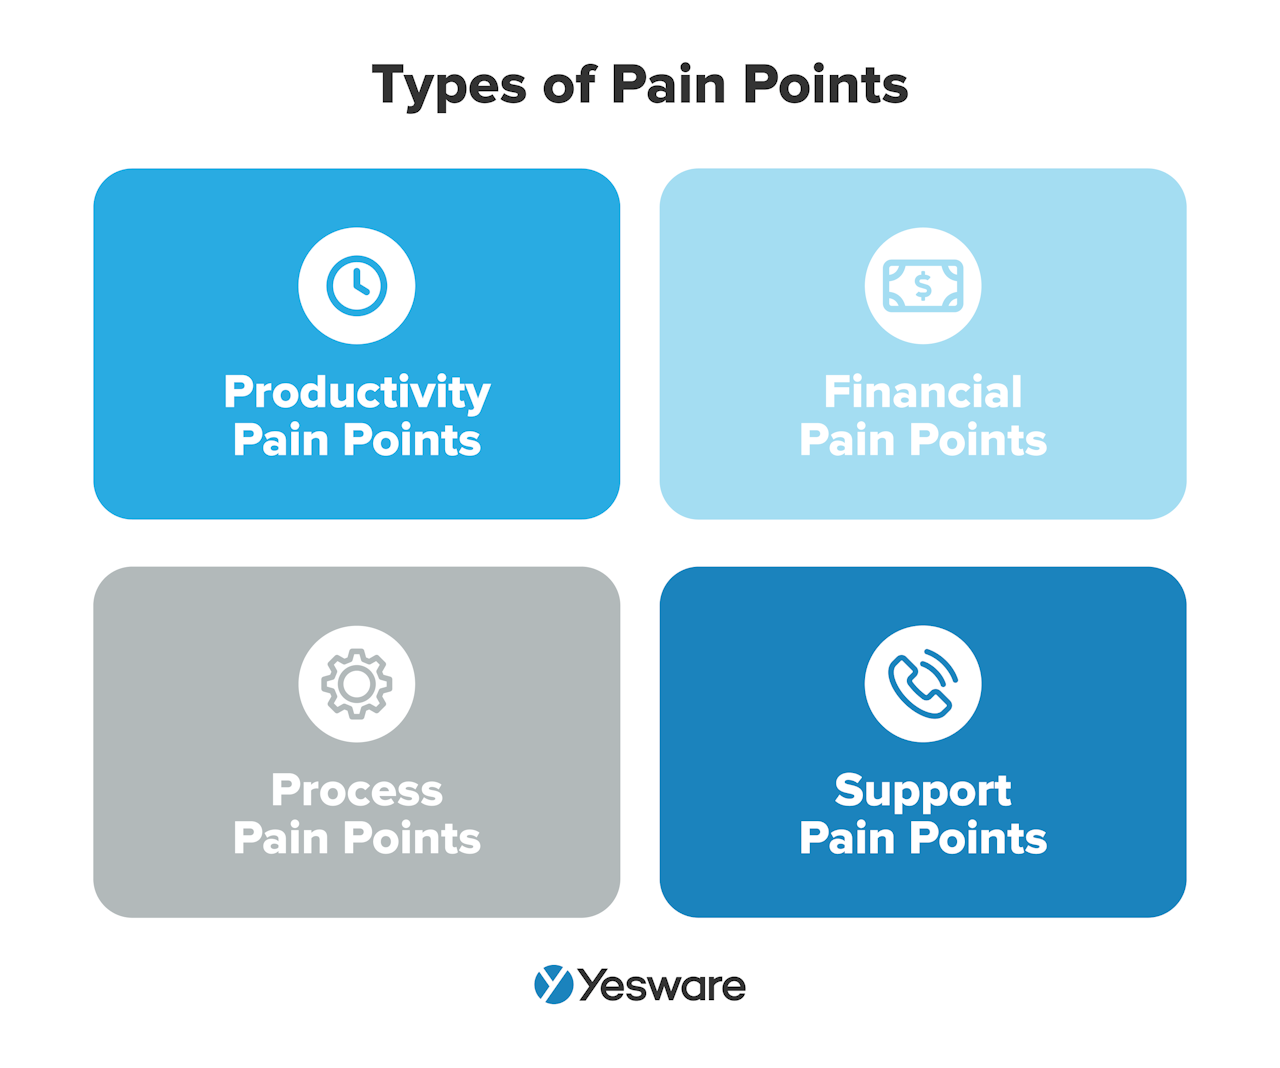 consultative selling: pain points